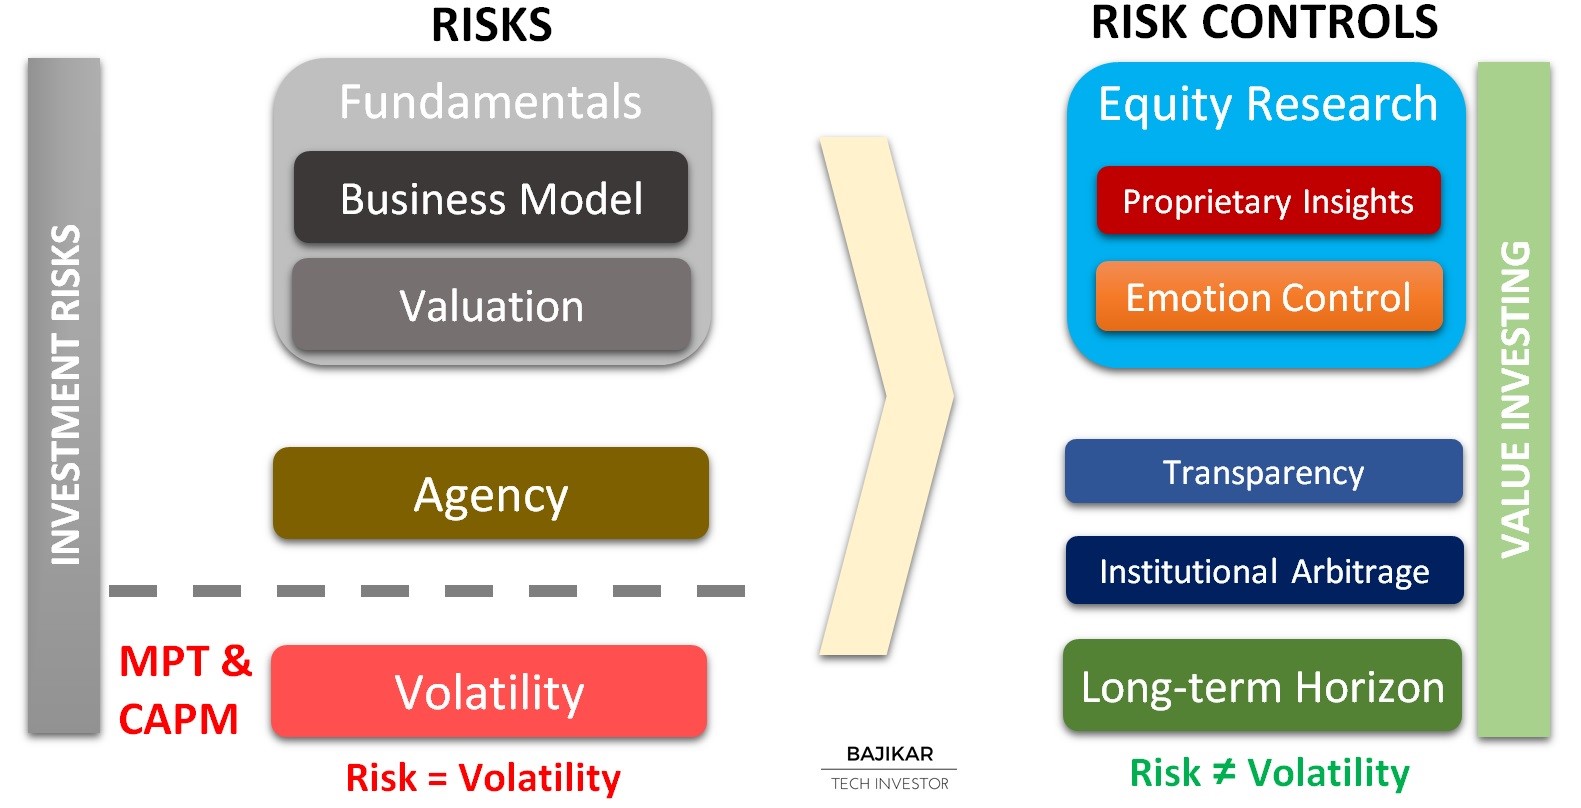 A Value Investor's View of Risk